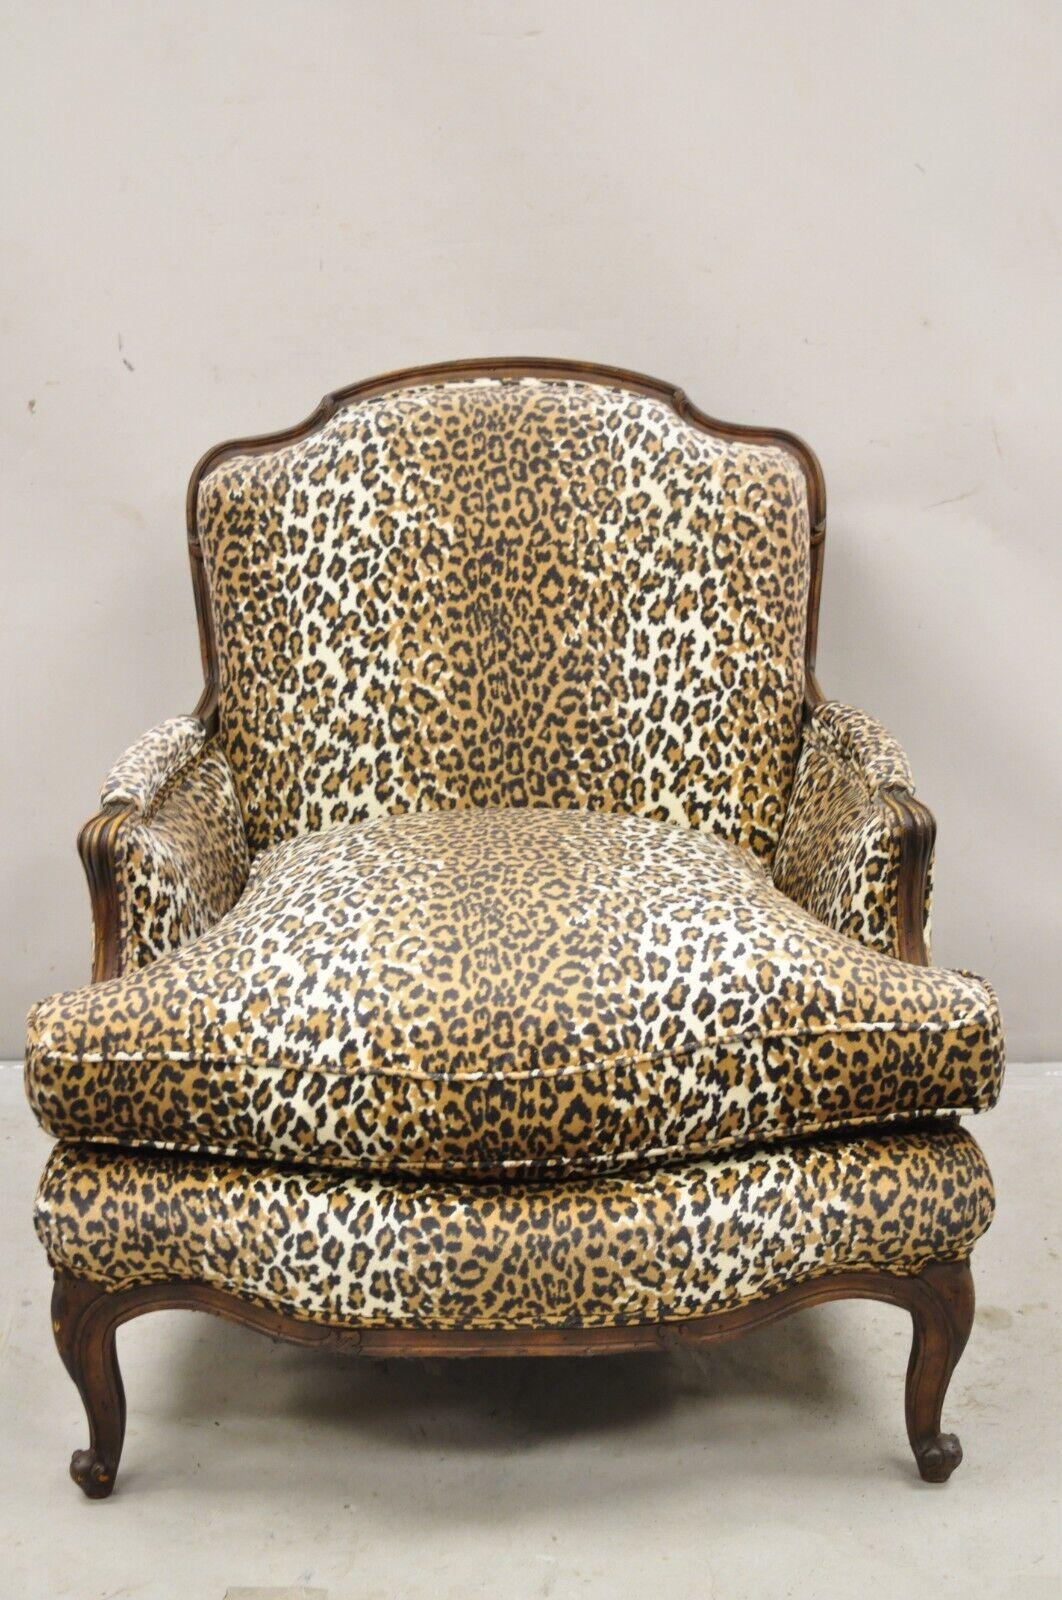 French Country Louis XV Style Cheetah Print Upholstered Bergere Club Lounge Chair. Item features a solid carved walnut frame, distressed finish, nice overstuffed form, high quality vintage chair. Circa Mid 20th Century. Measurements: 36